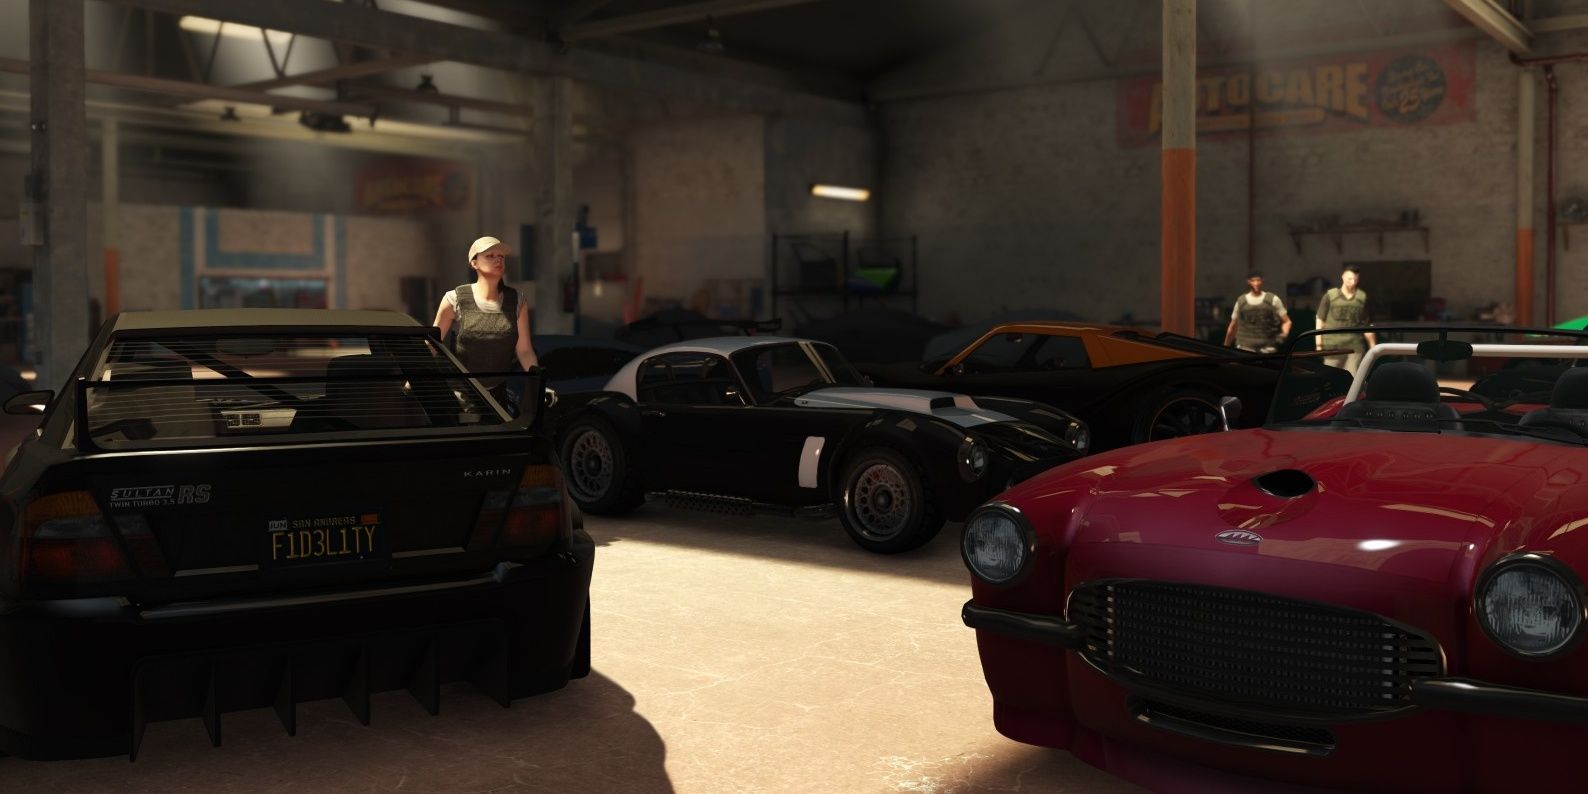 Some people taking care of the luxurious cars inside the warehouse.